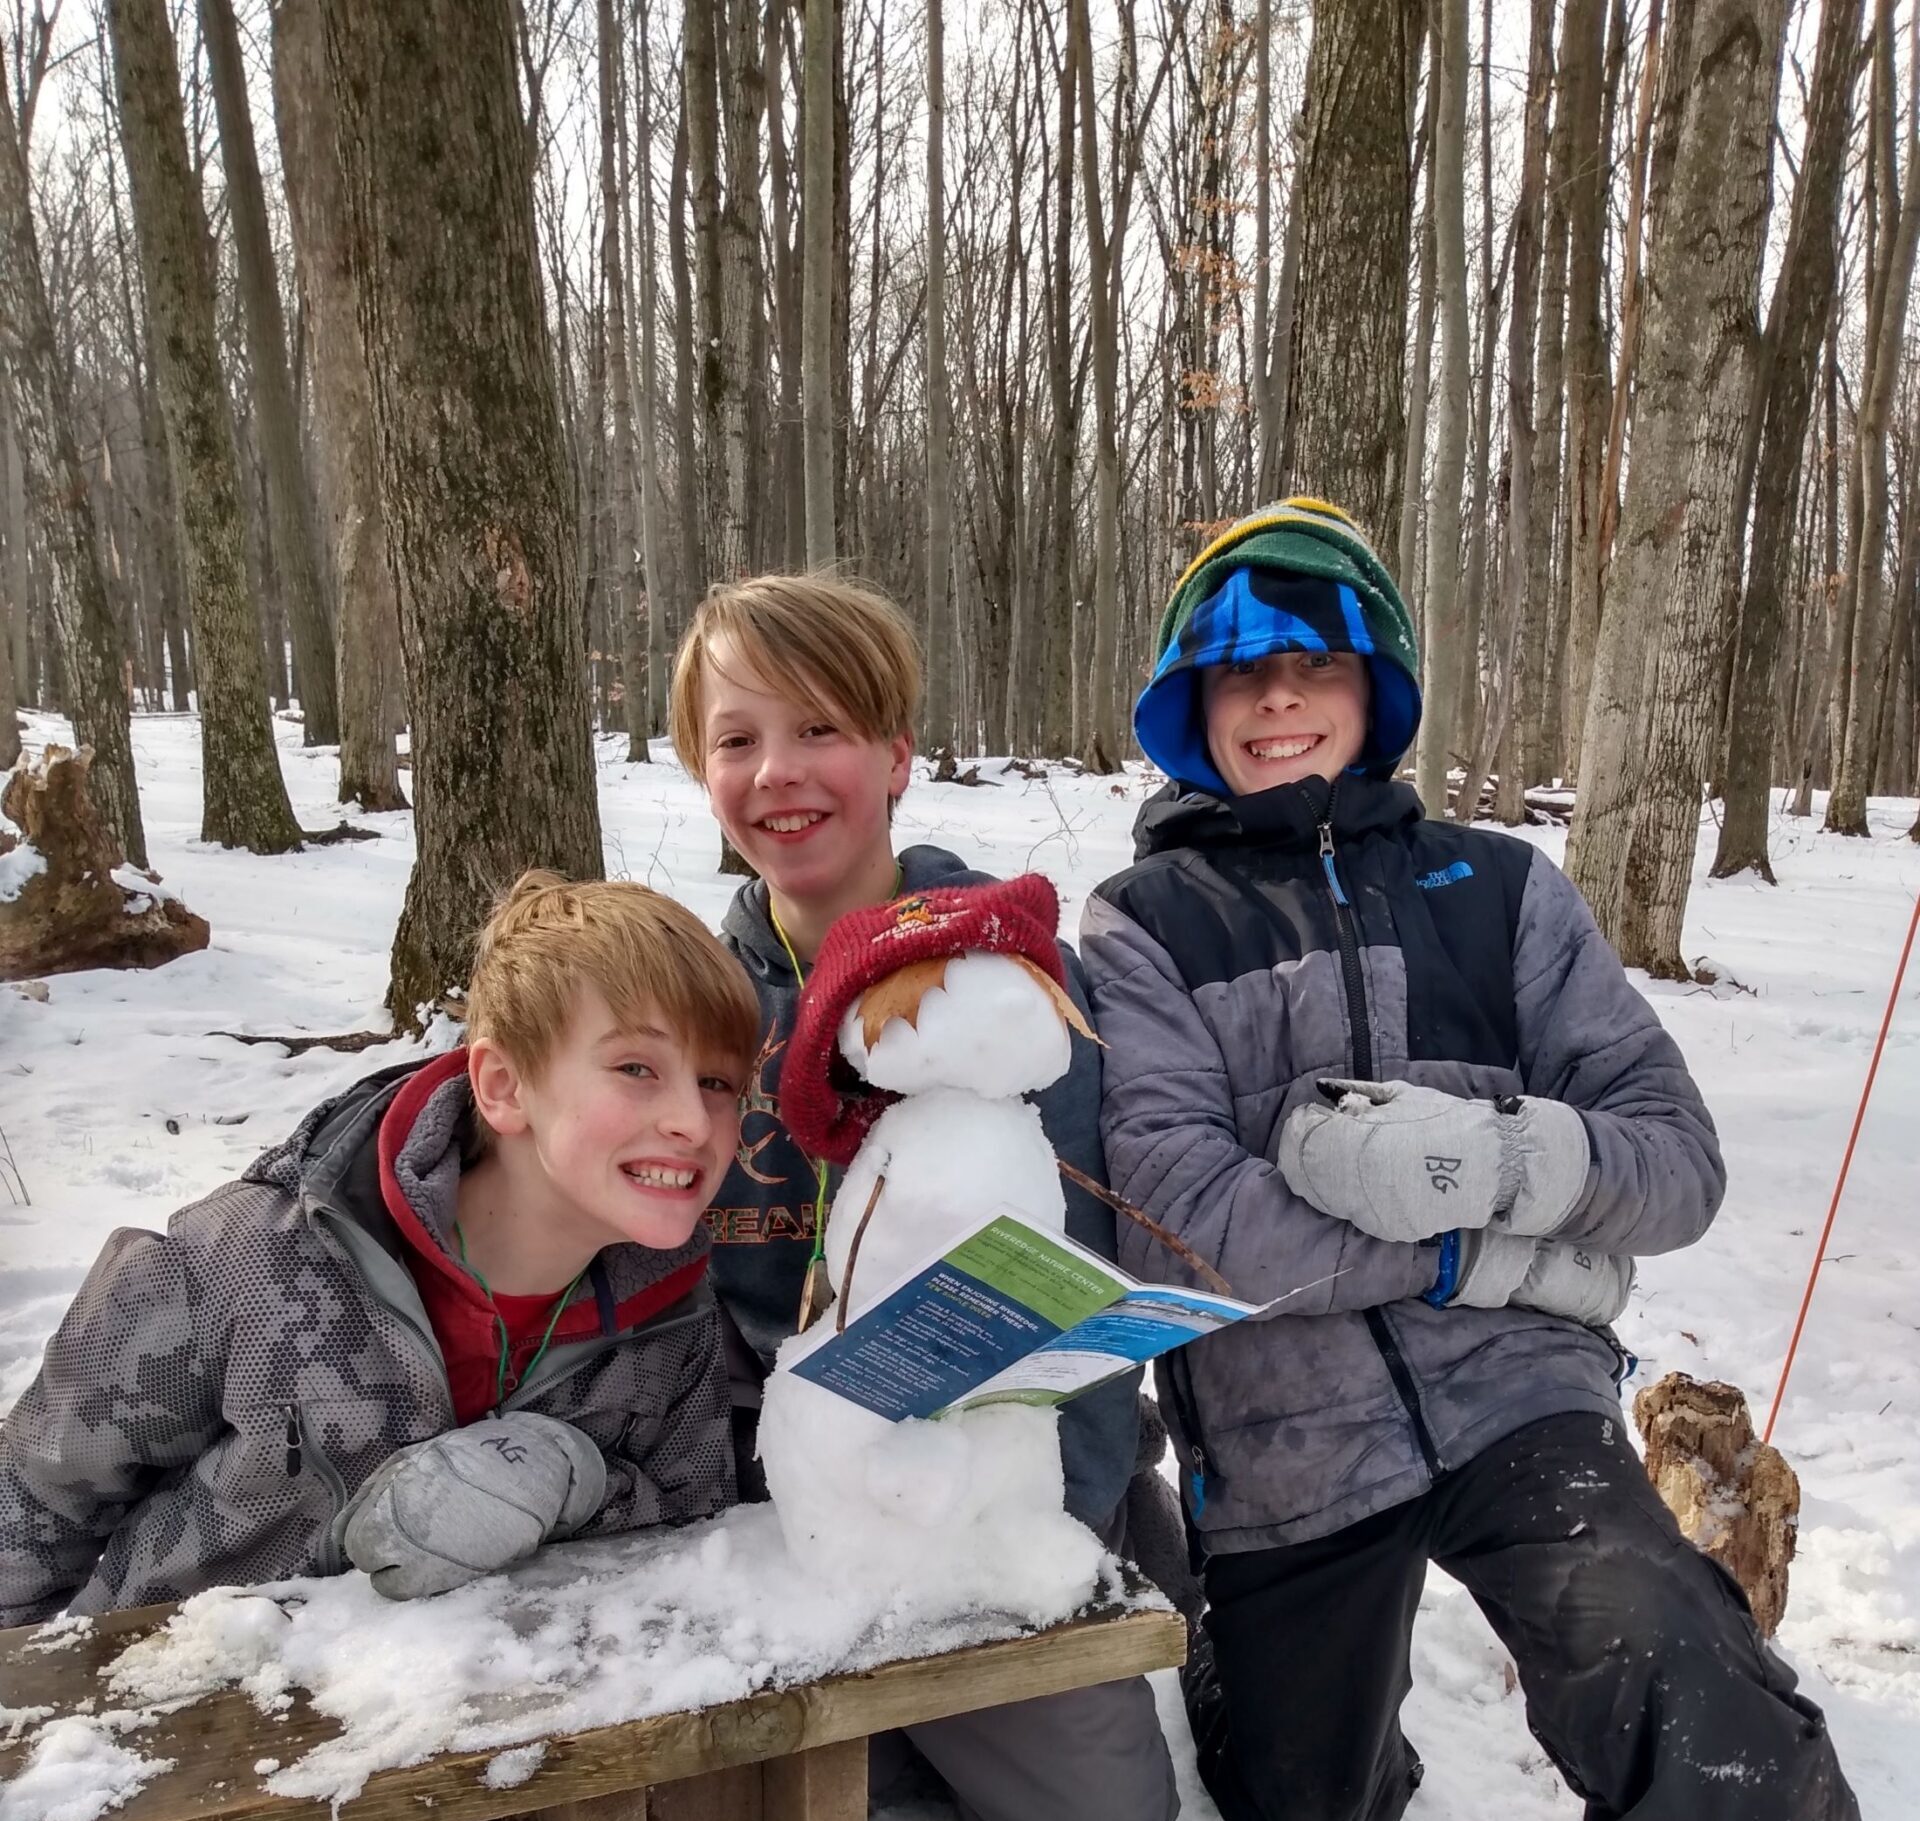 3 kids bundled up in the Riveredge forest in winter smile at the camera with the snowman on a bench in the center